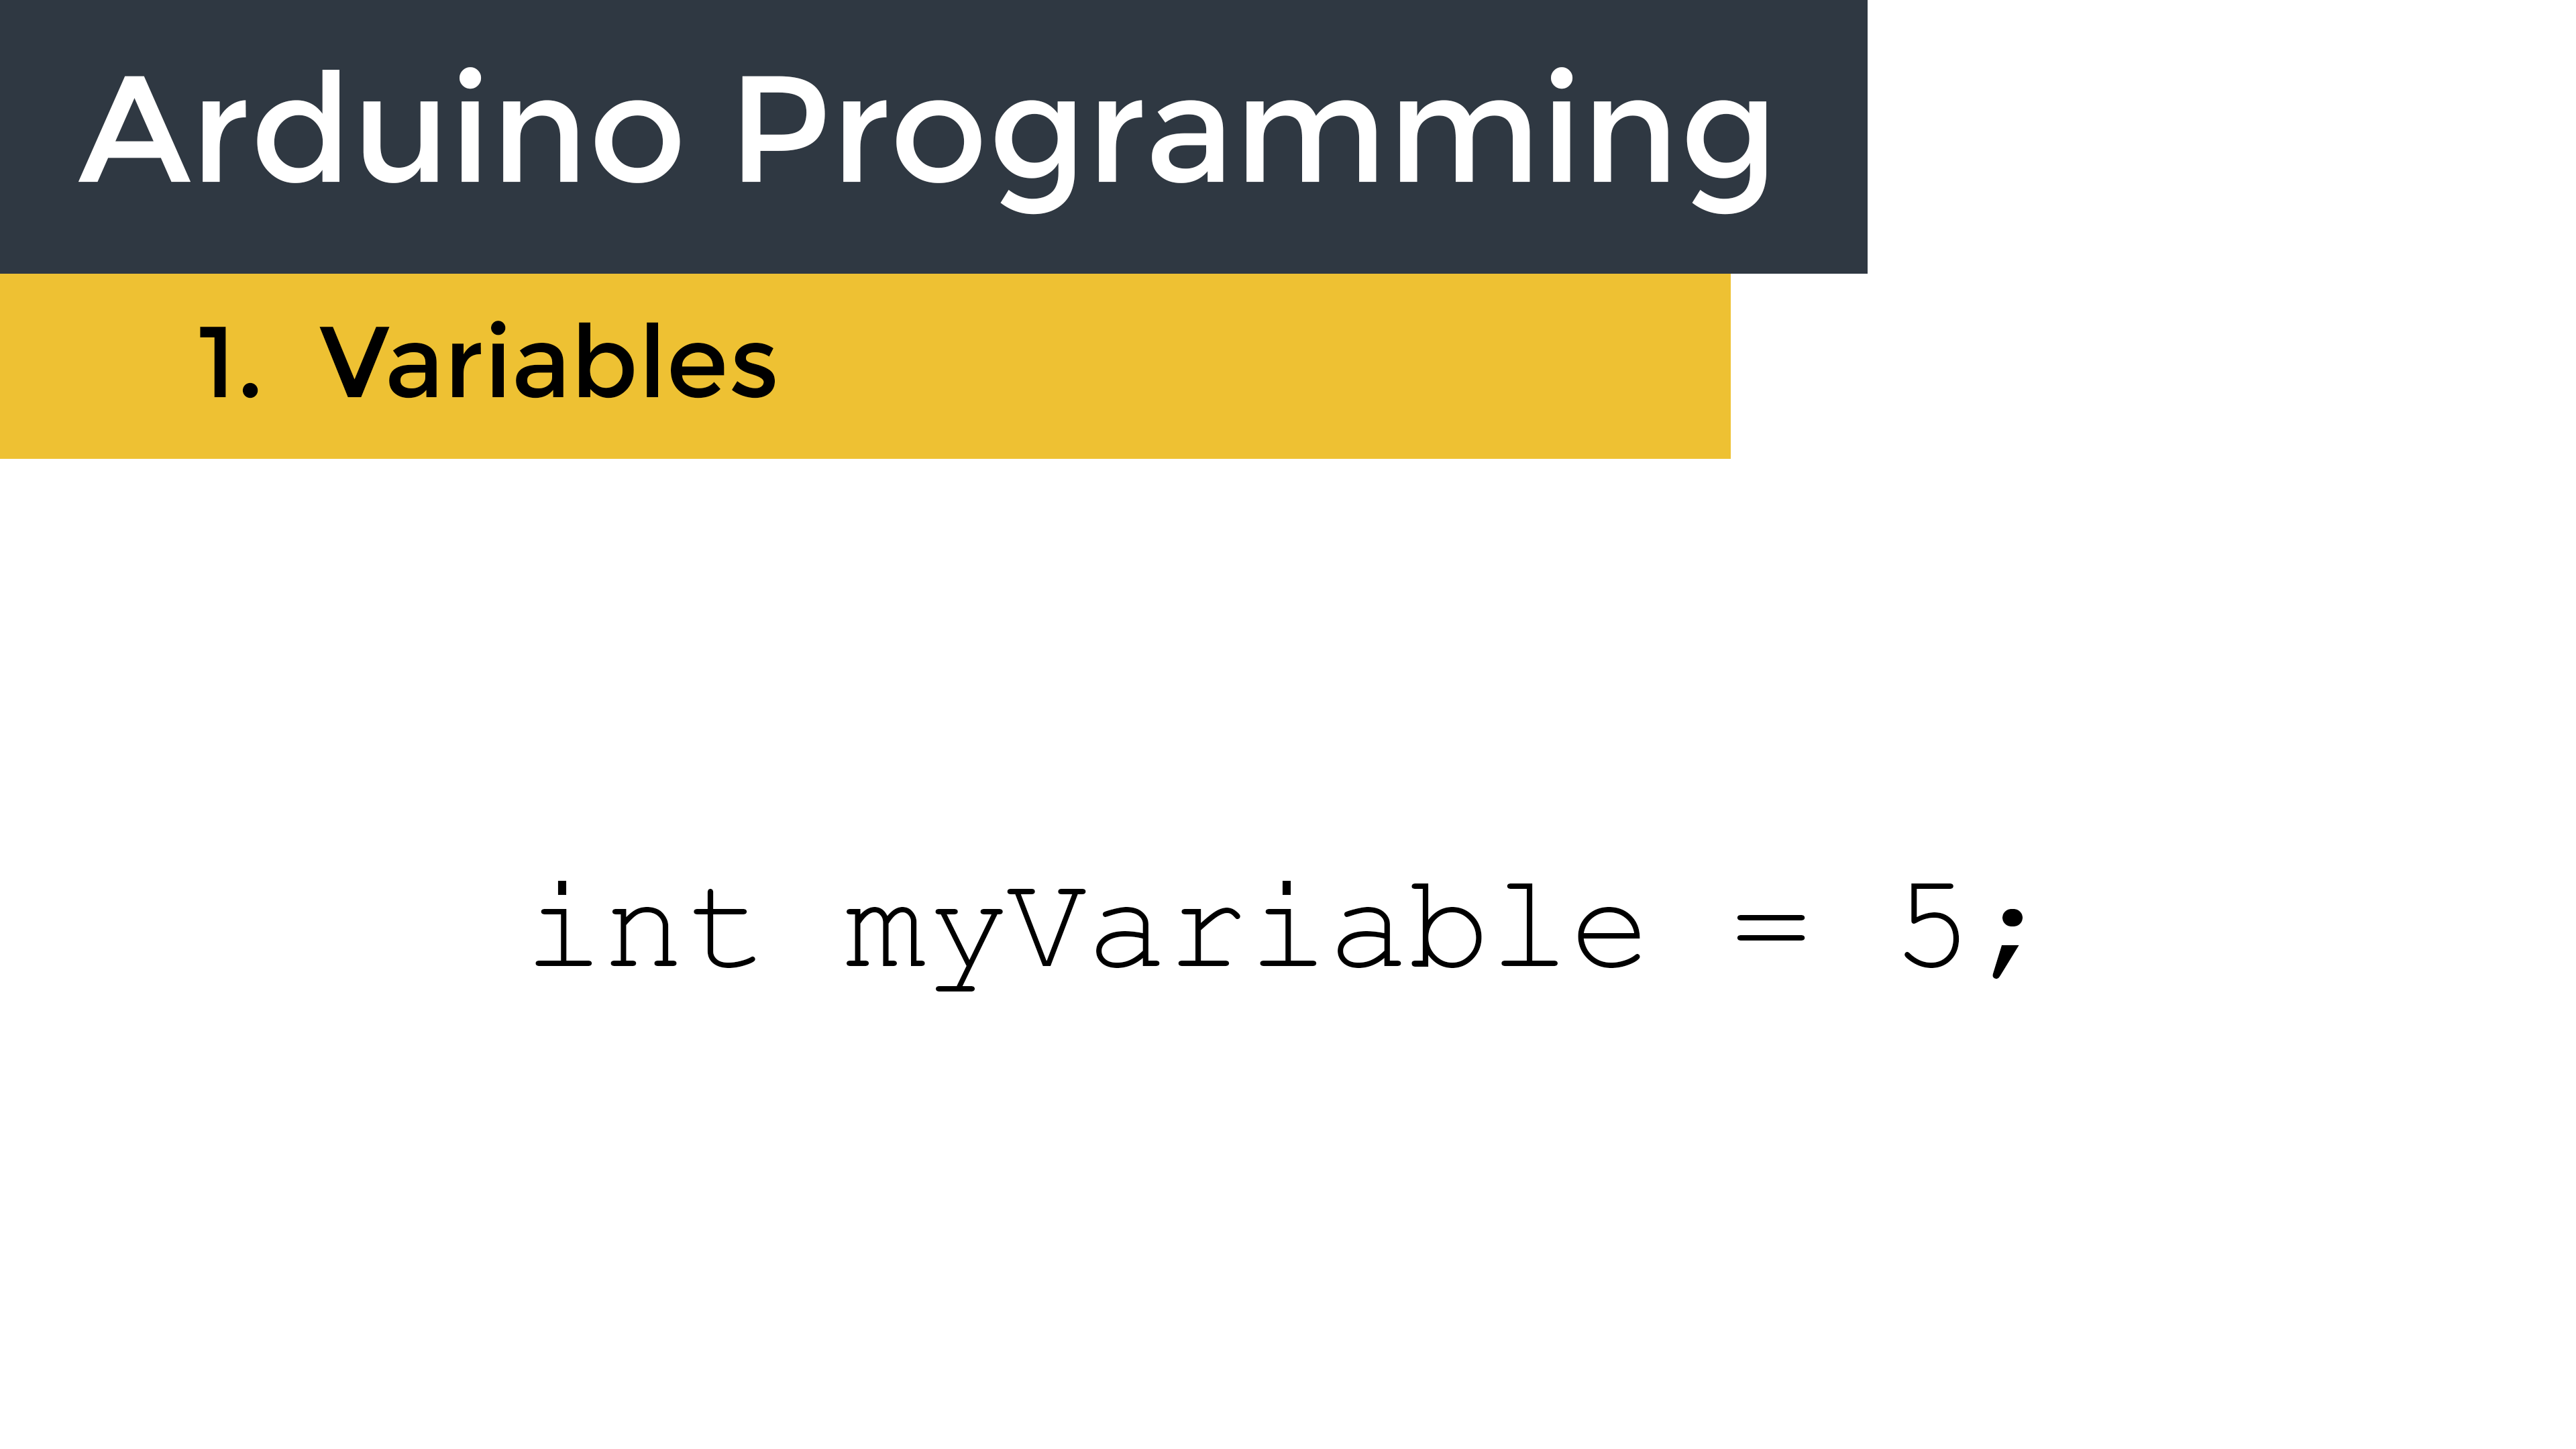 How to Use Variables in Arduino Programs